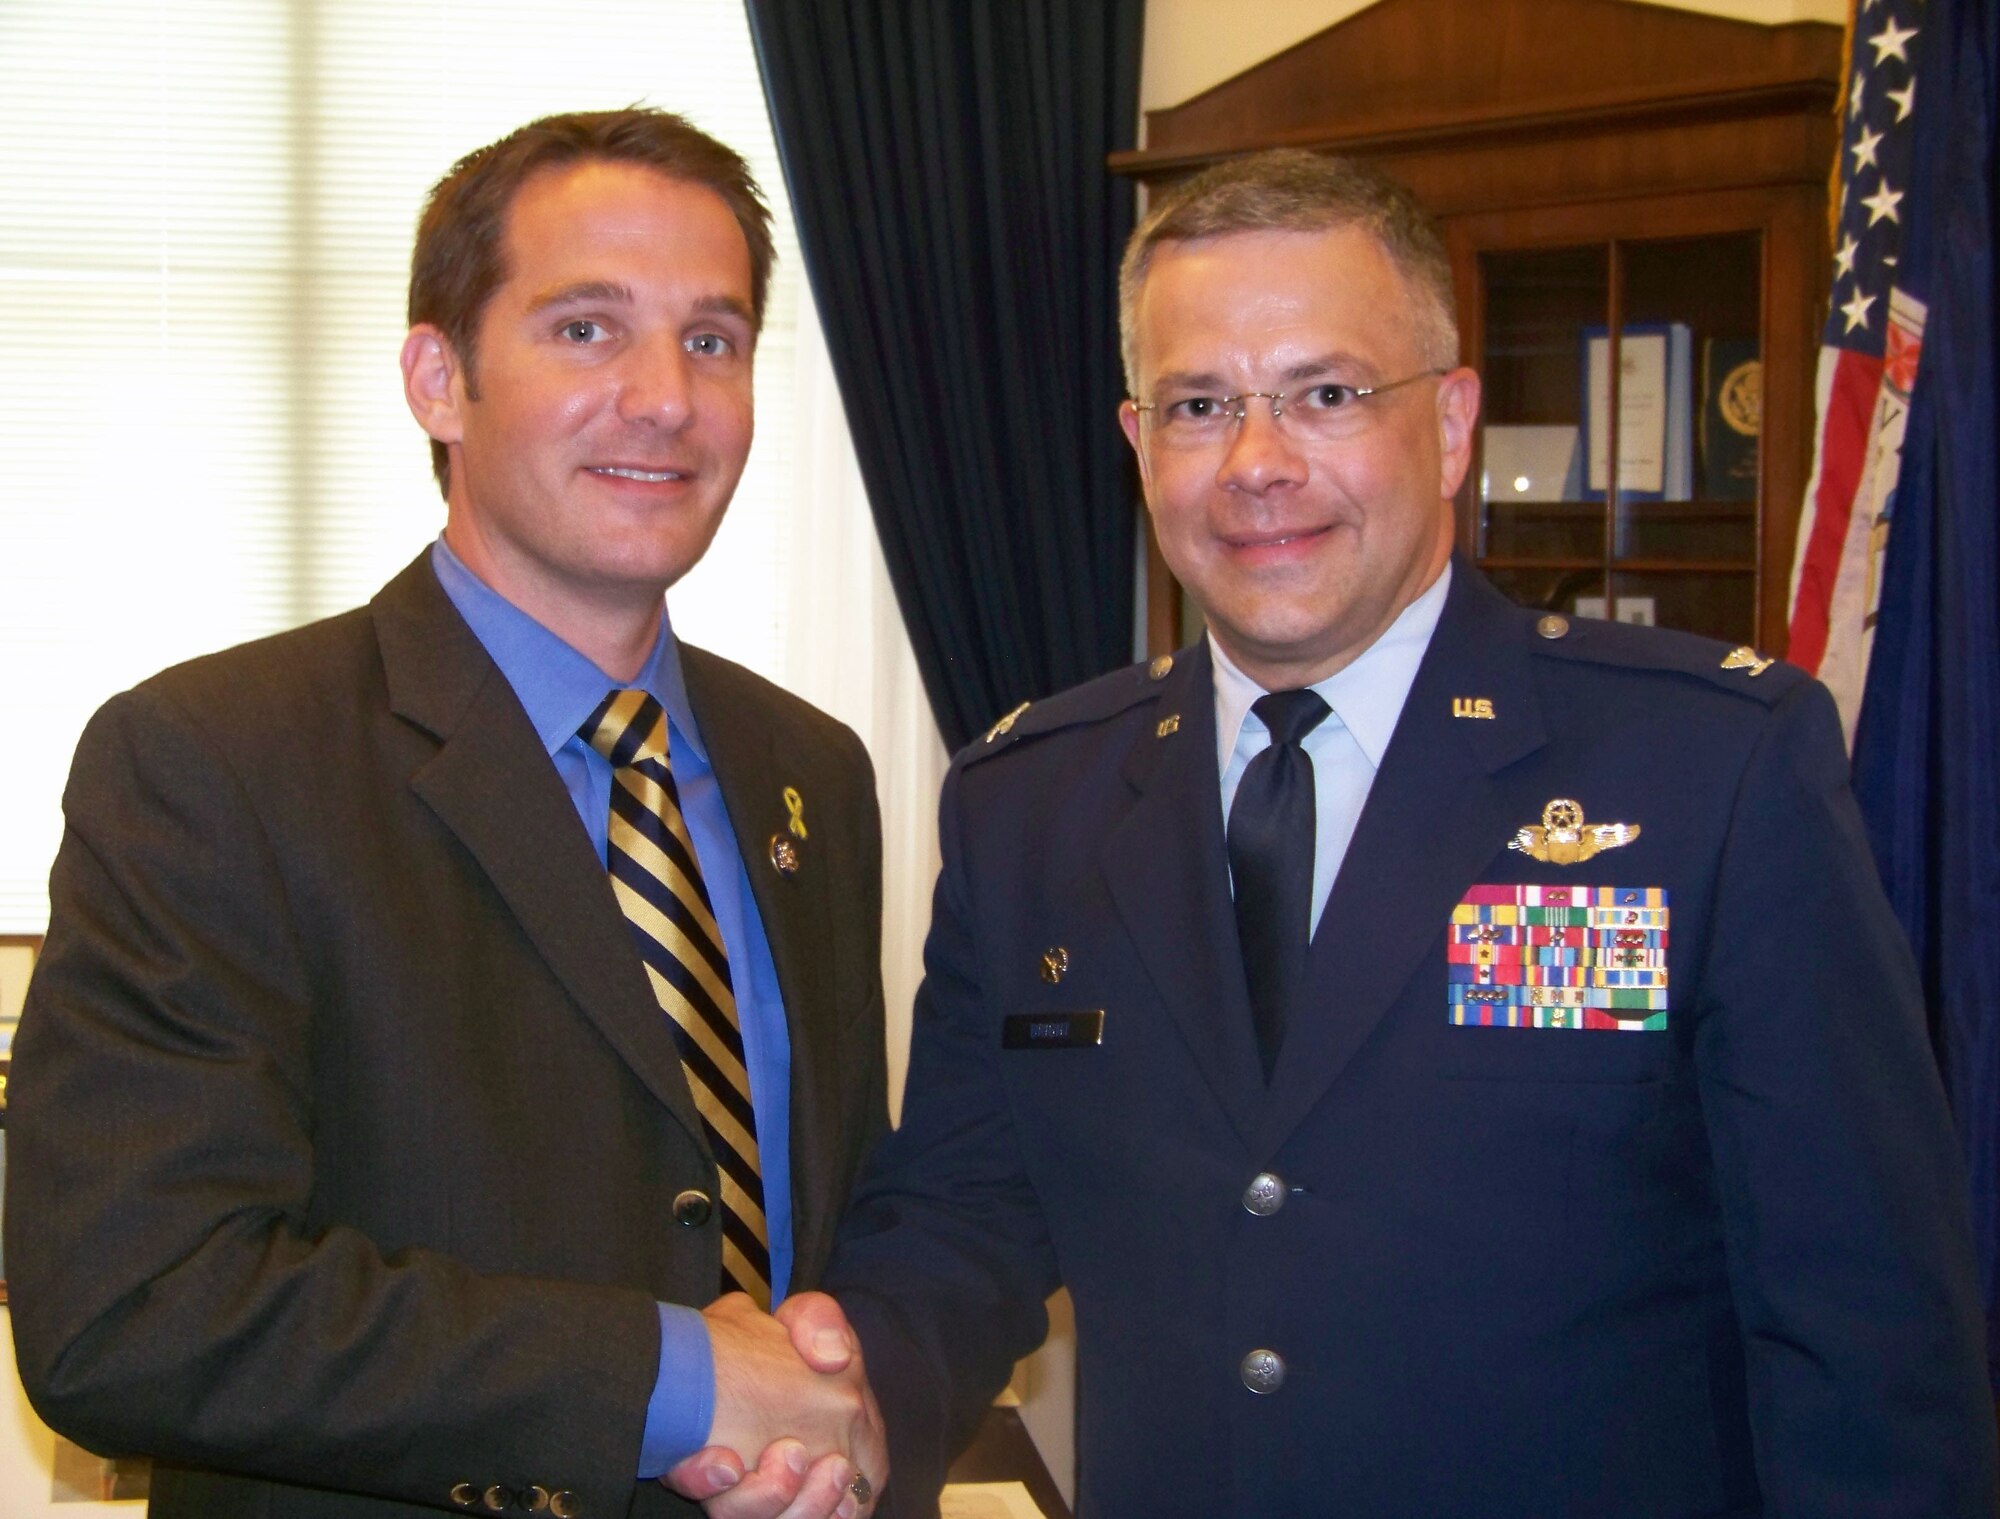 Col. Randal L. Bright, 512th Airlift Wing commander, met with U.S. Congressman Glenn Nye for Virginia's second district June 3 at the U.S. Capitol in Washington D.C. Of the 512th Airlift Wing's 1,800 members, almost 300 of those members reside in Virginia. During his trip to D.C., the colonel also visited the offices of Delaware's U.S Senators Thomas Carper and Edward E. "Ted" Kaufman, Delaware U.S. Congressman Mike Castle and Maryland U.S. Congressman Steny H. Hoyer. (U.S. Air Force photo/Capt. Marnee A.C. Losurdo)
